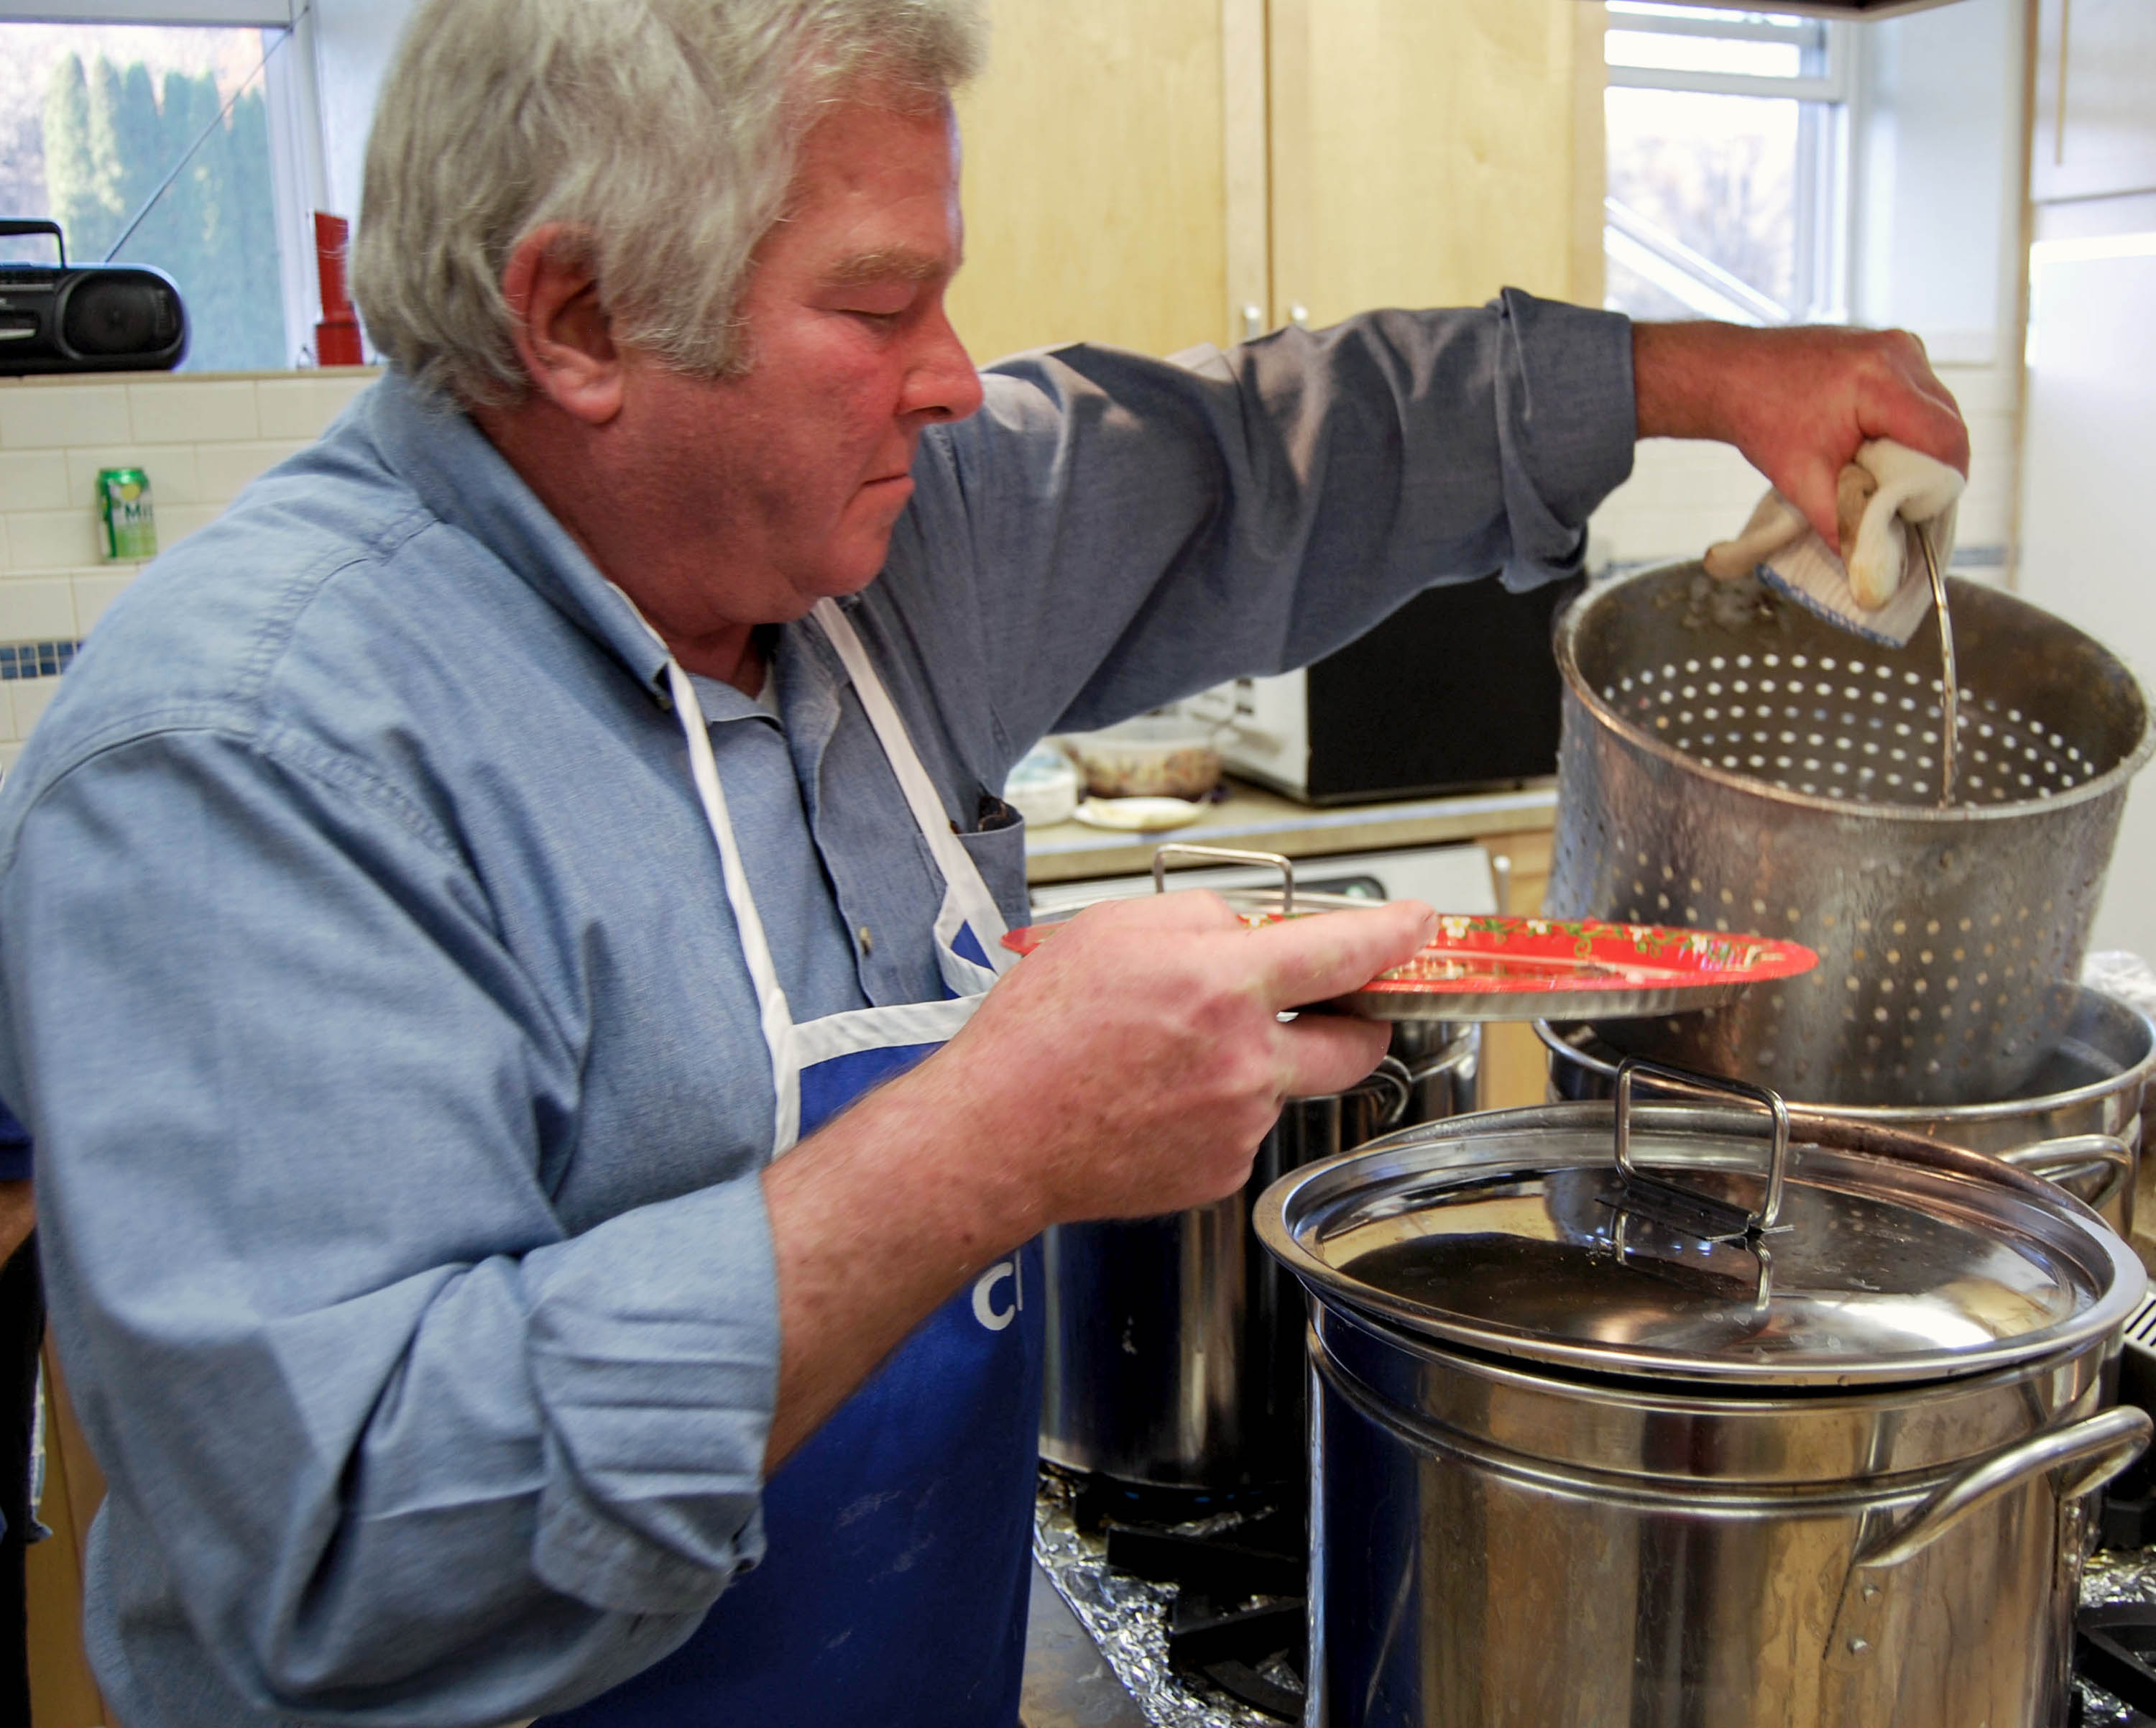 After simmering in water, Greg Herrling prepares to put lutefisk on a plate.
Photo by: Molly Reppen